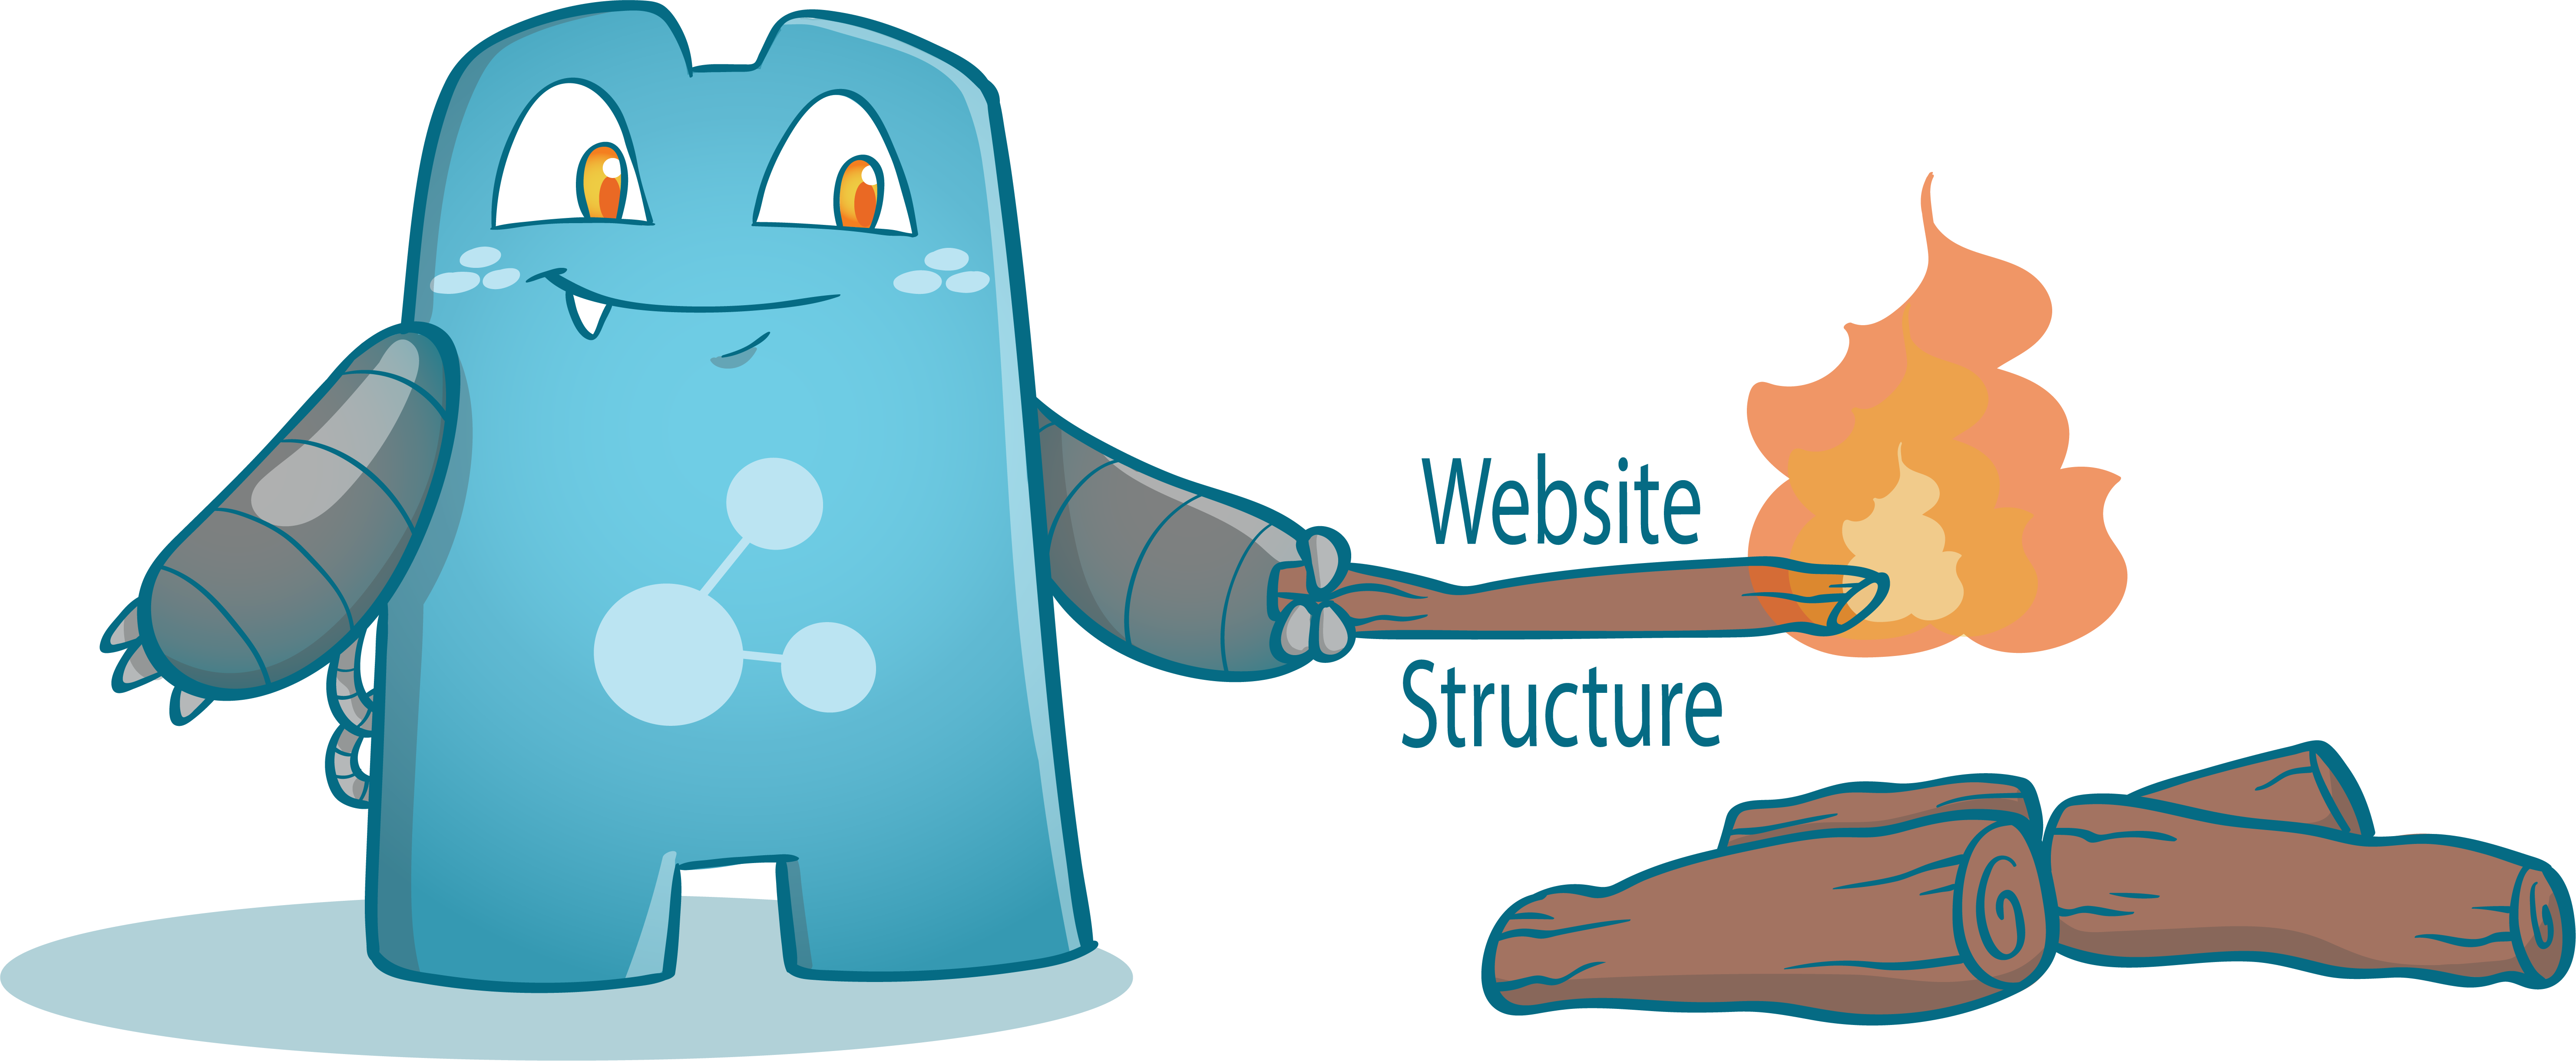 Website Structure: An Overview